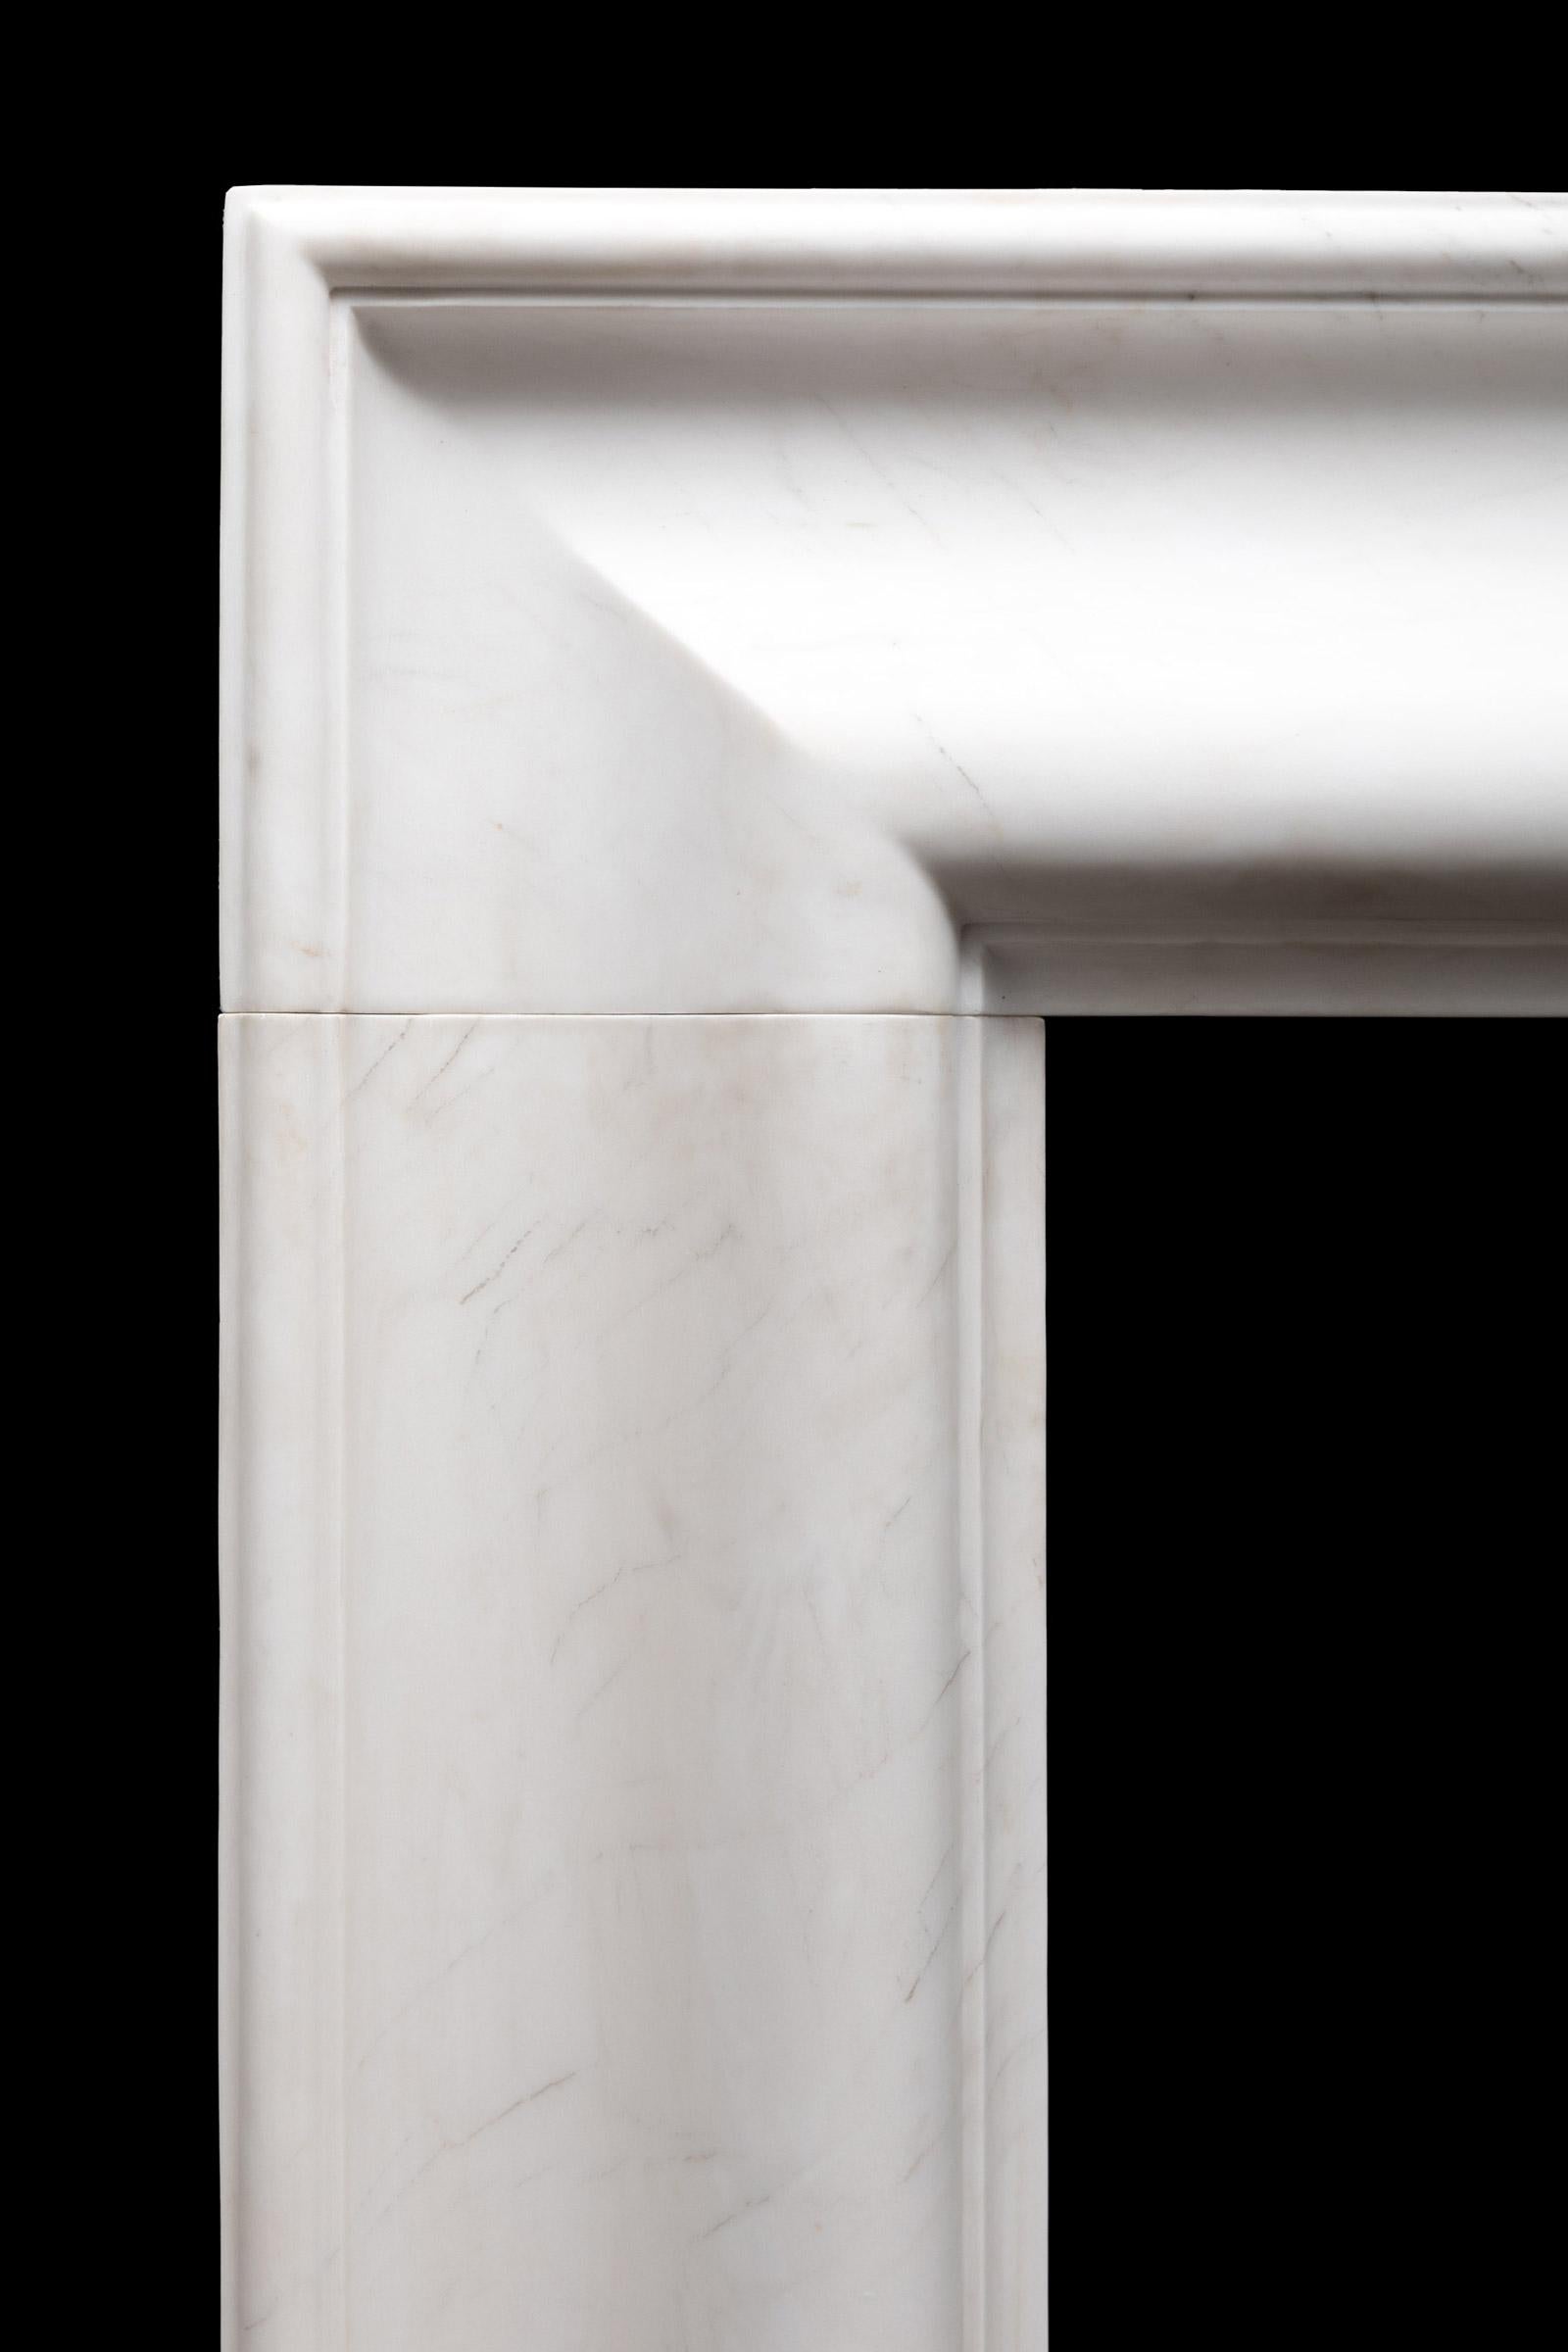 A large bolection fireplace produced in three solid blocks of white statuary marble with very subtle veining.
The Roma Bolection is a stylishly simple and robust example of a bolection moulding fireplace surround.